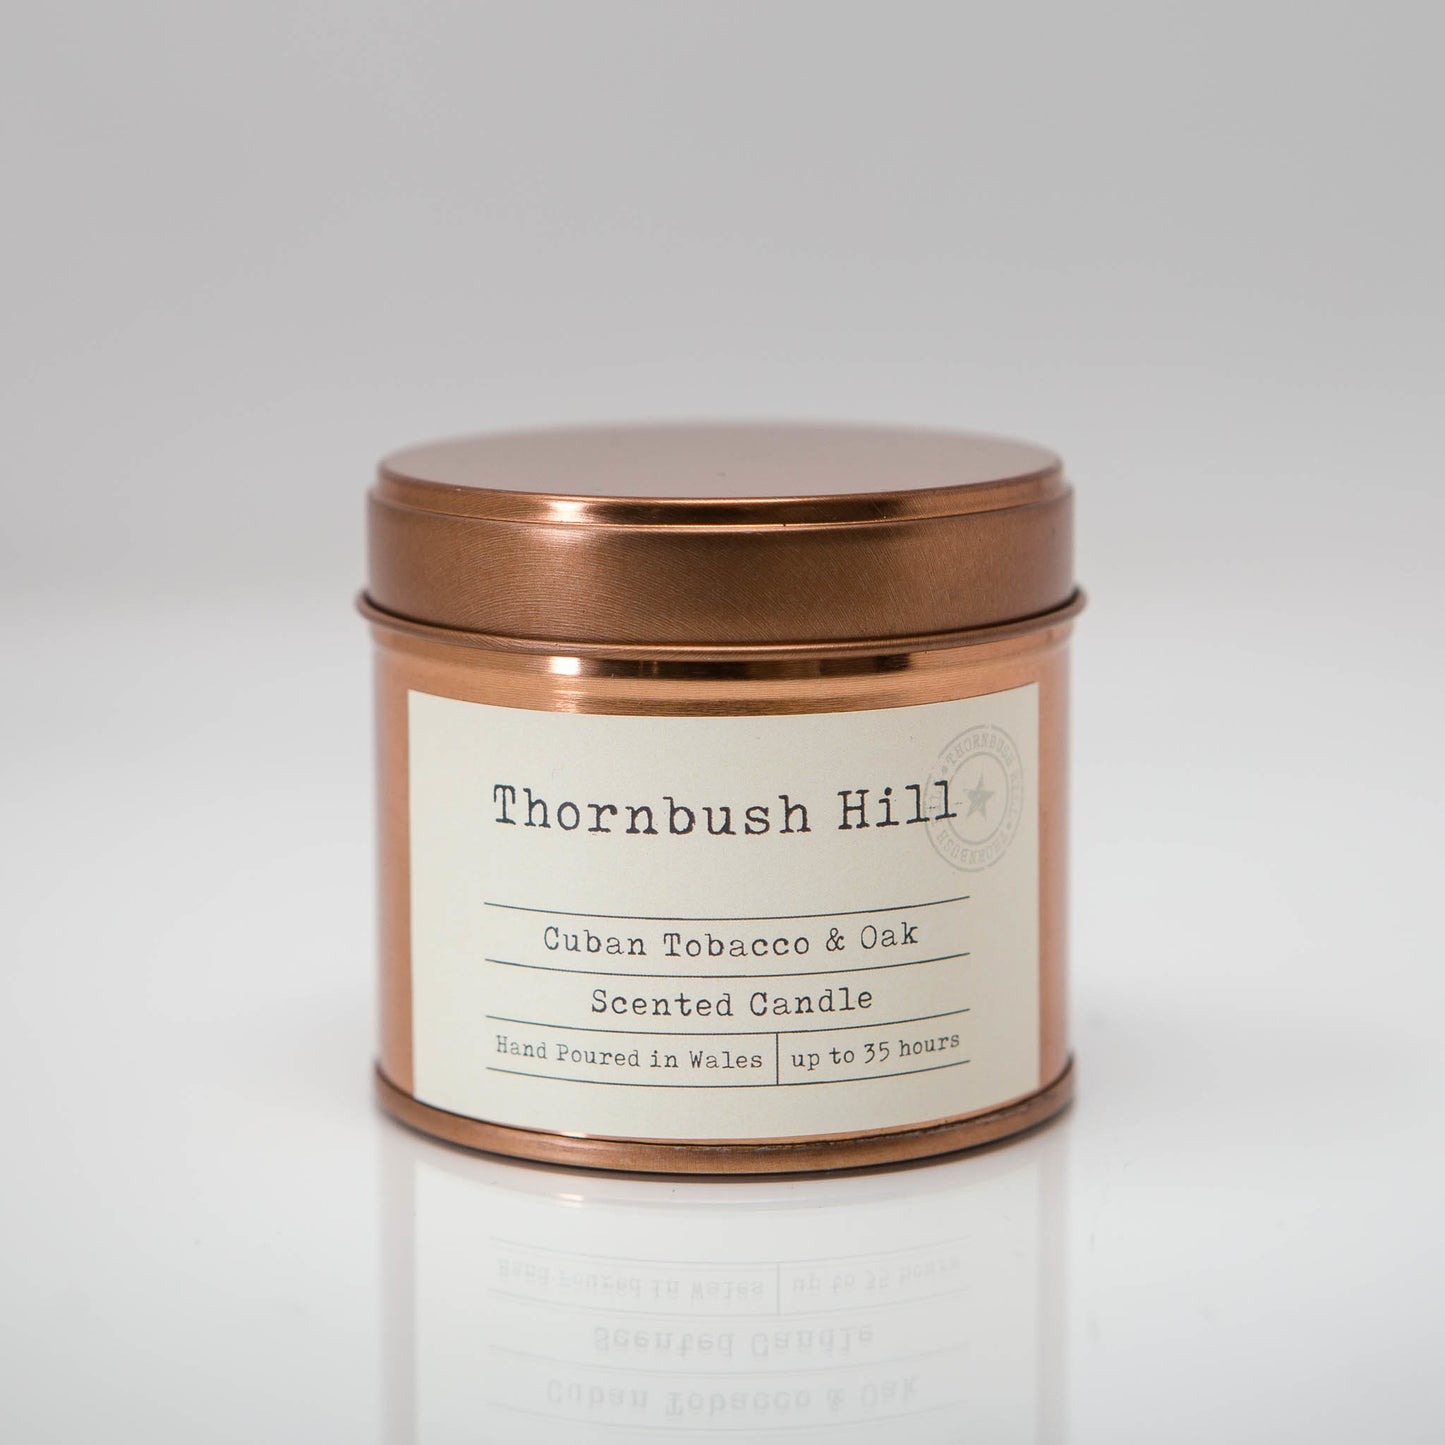 Cuban Tobacco & Oak Scented Soy Tin Candle